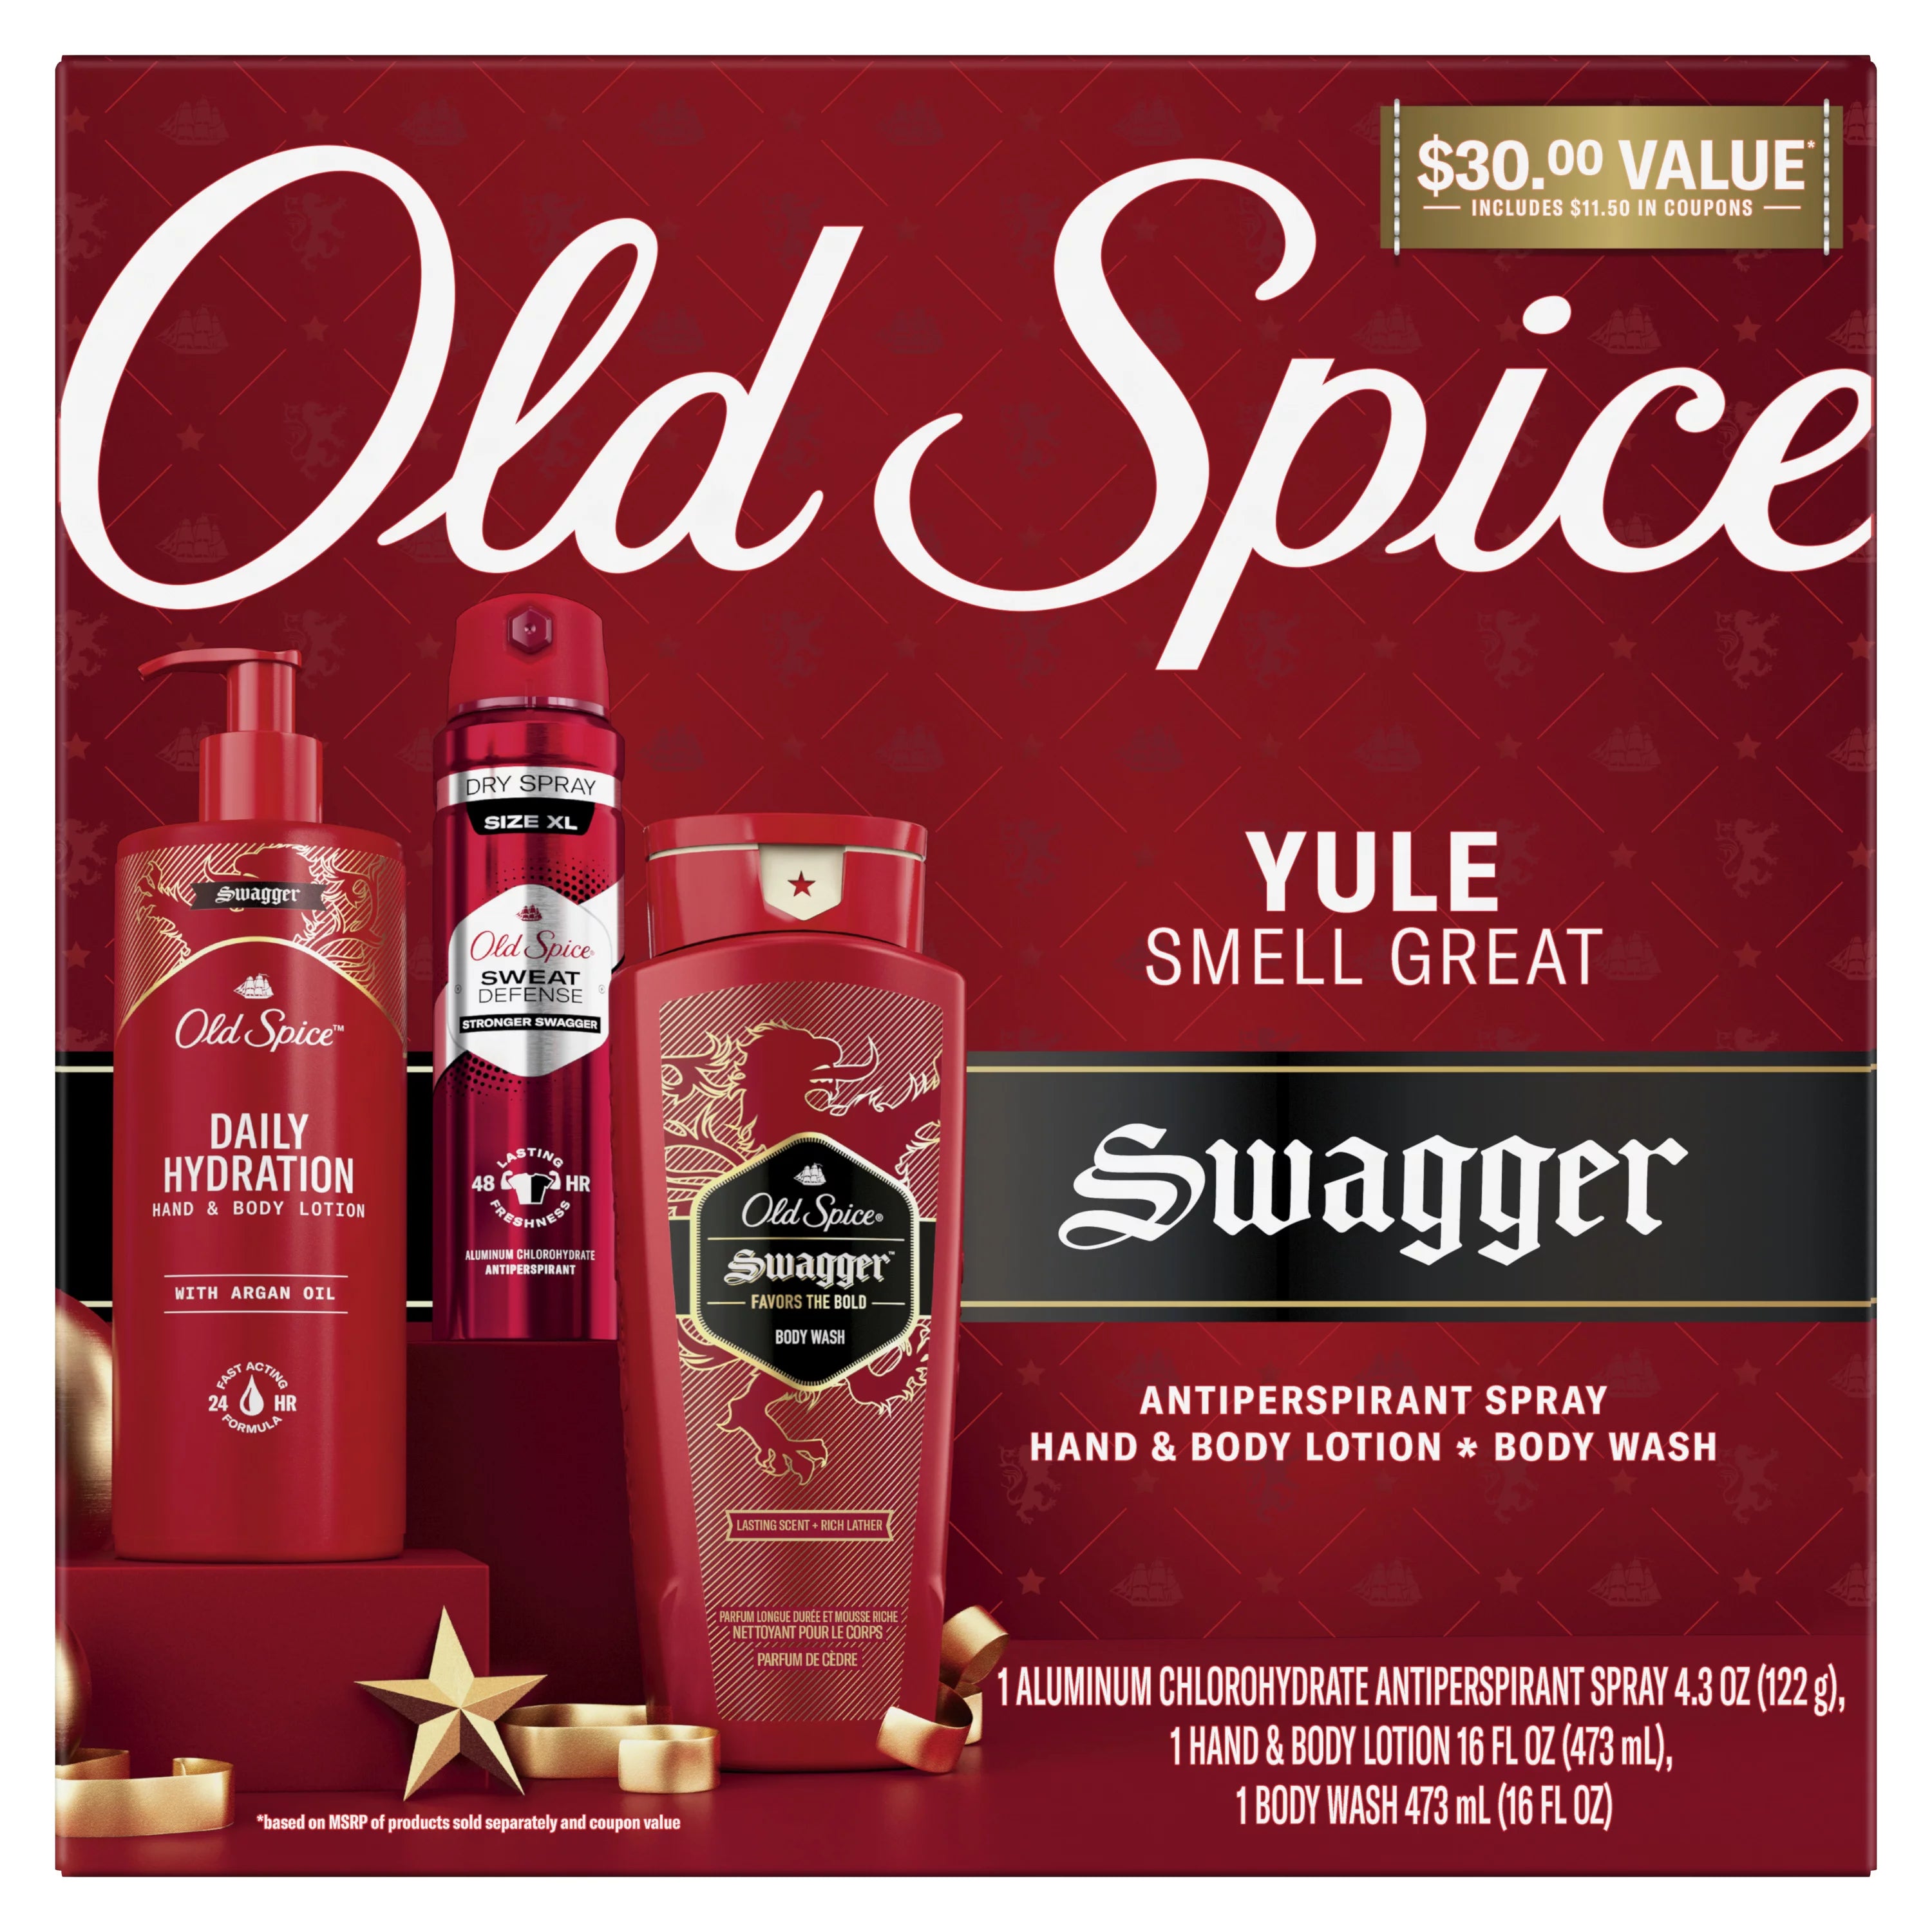 OLD SPICE Yule Smell Great Swagger Antiperspirant Spray Hand & Body Lotion Body Wash